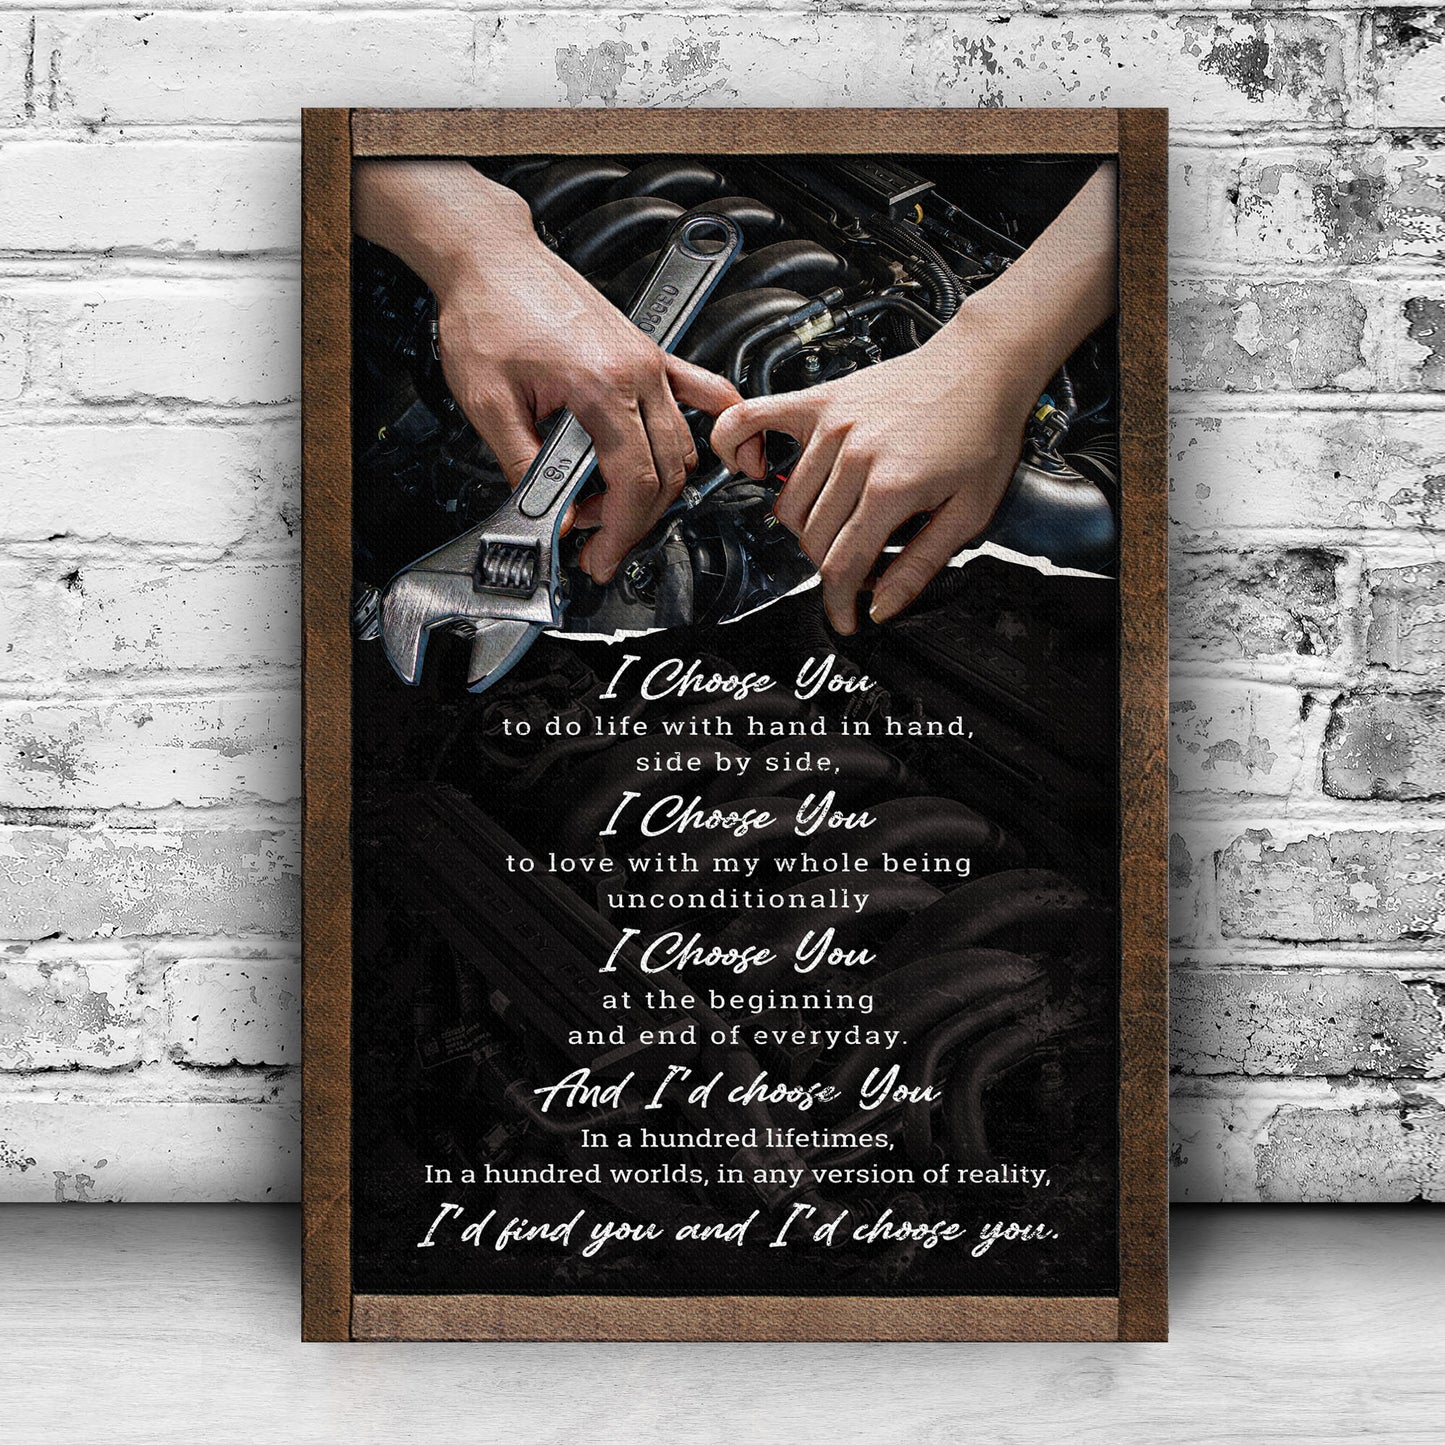 I'd Find You And I'd Choose You Couple Sign Style 1 - Image by Tailored Canvases